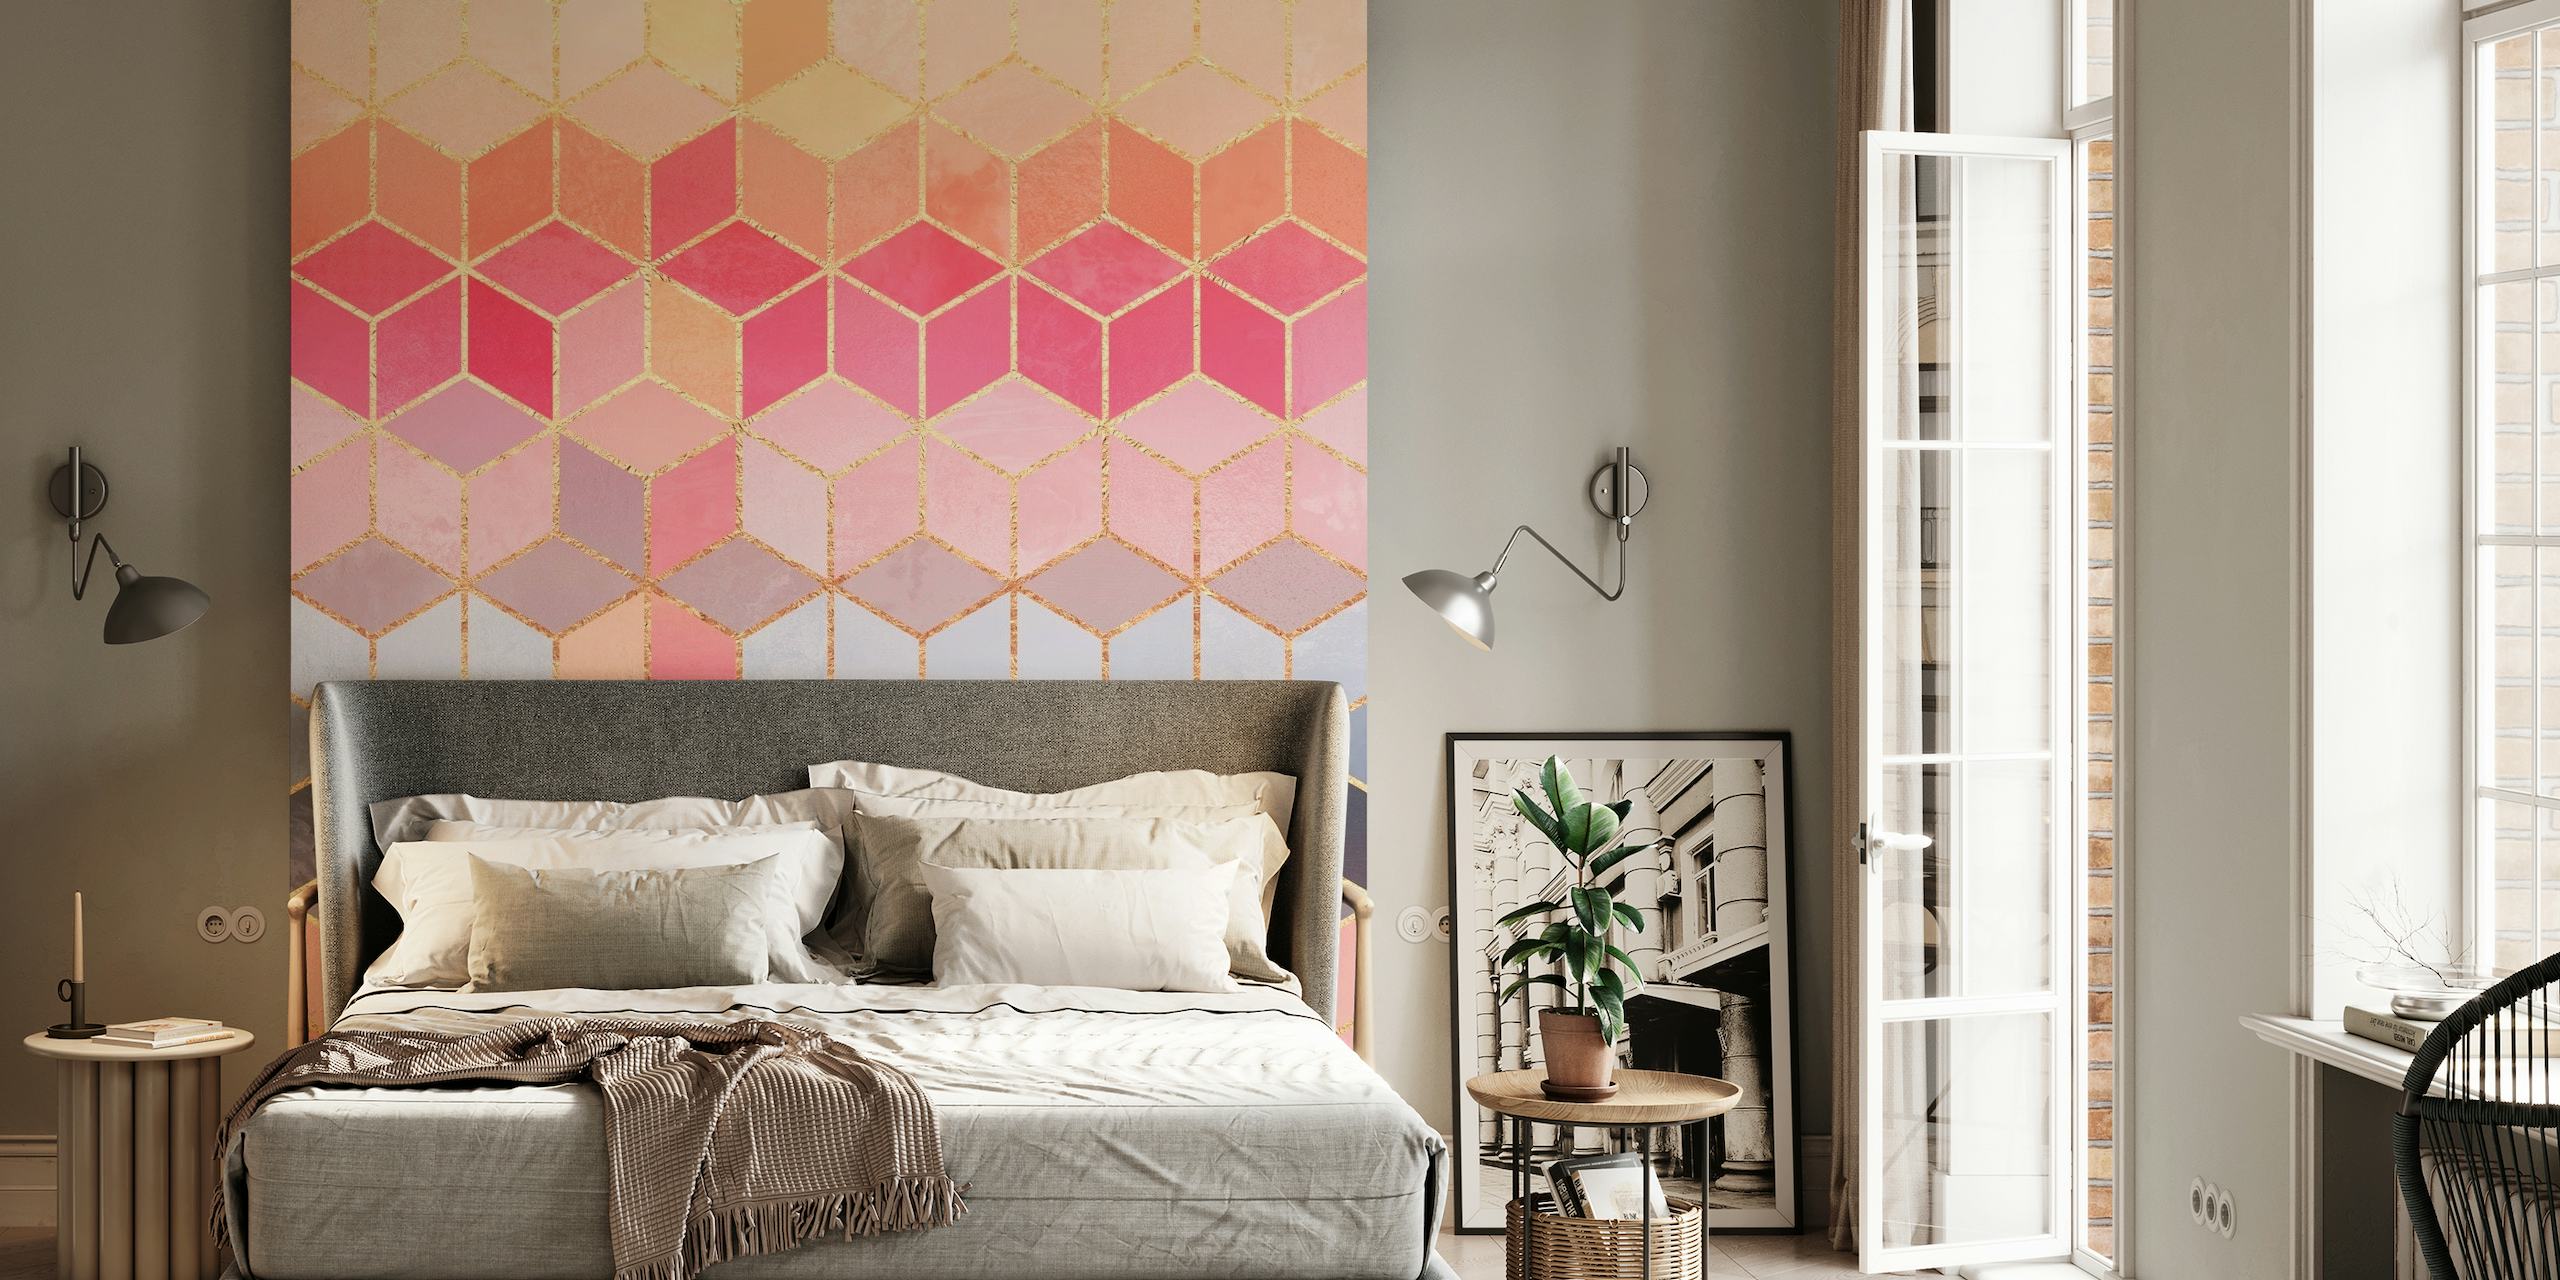 Happy Cubes wall mural with geometric cube pattern in pink, blue, and yellow shades